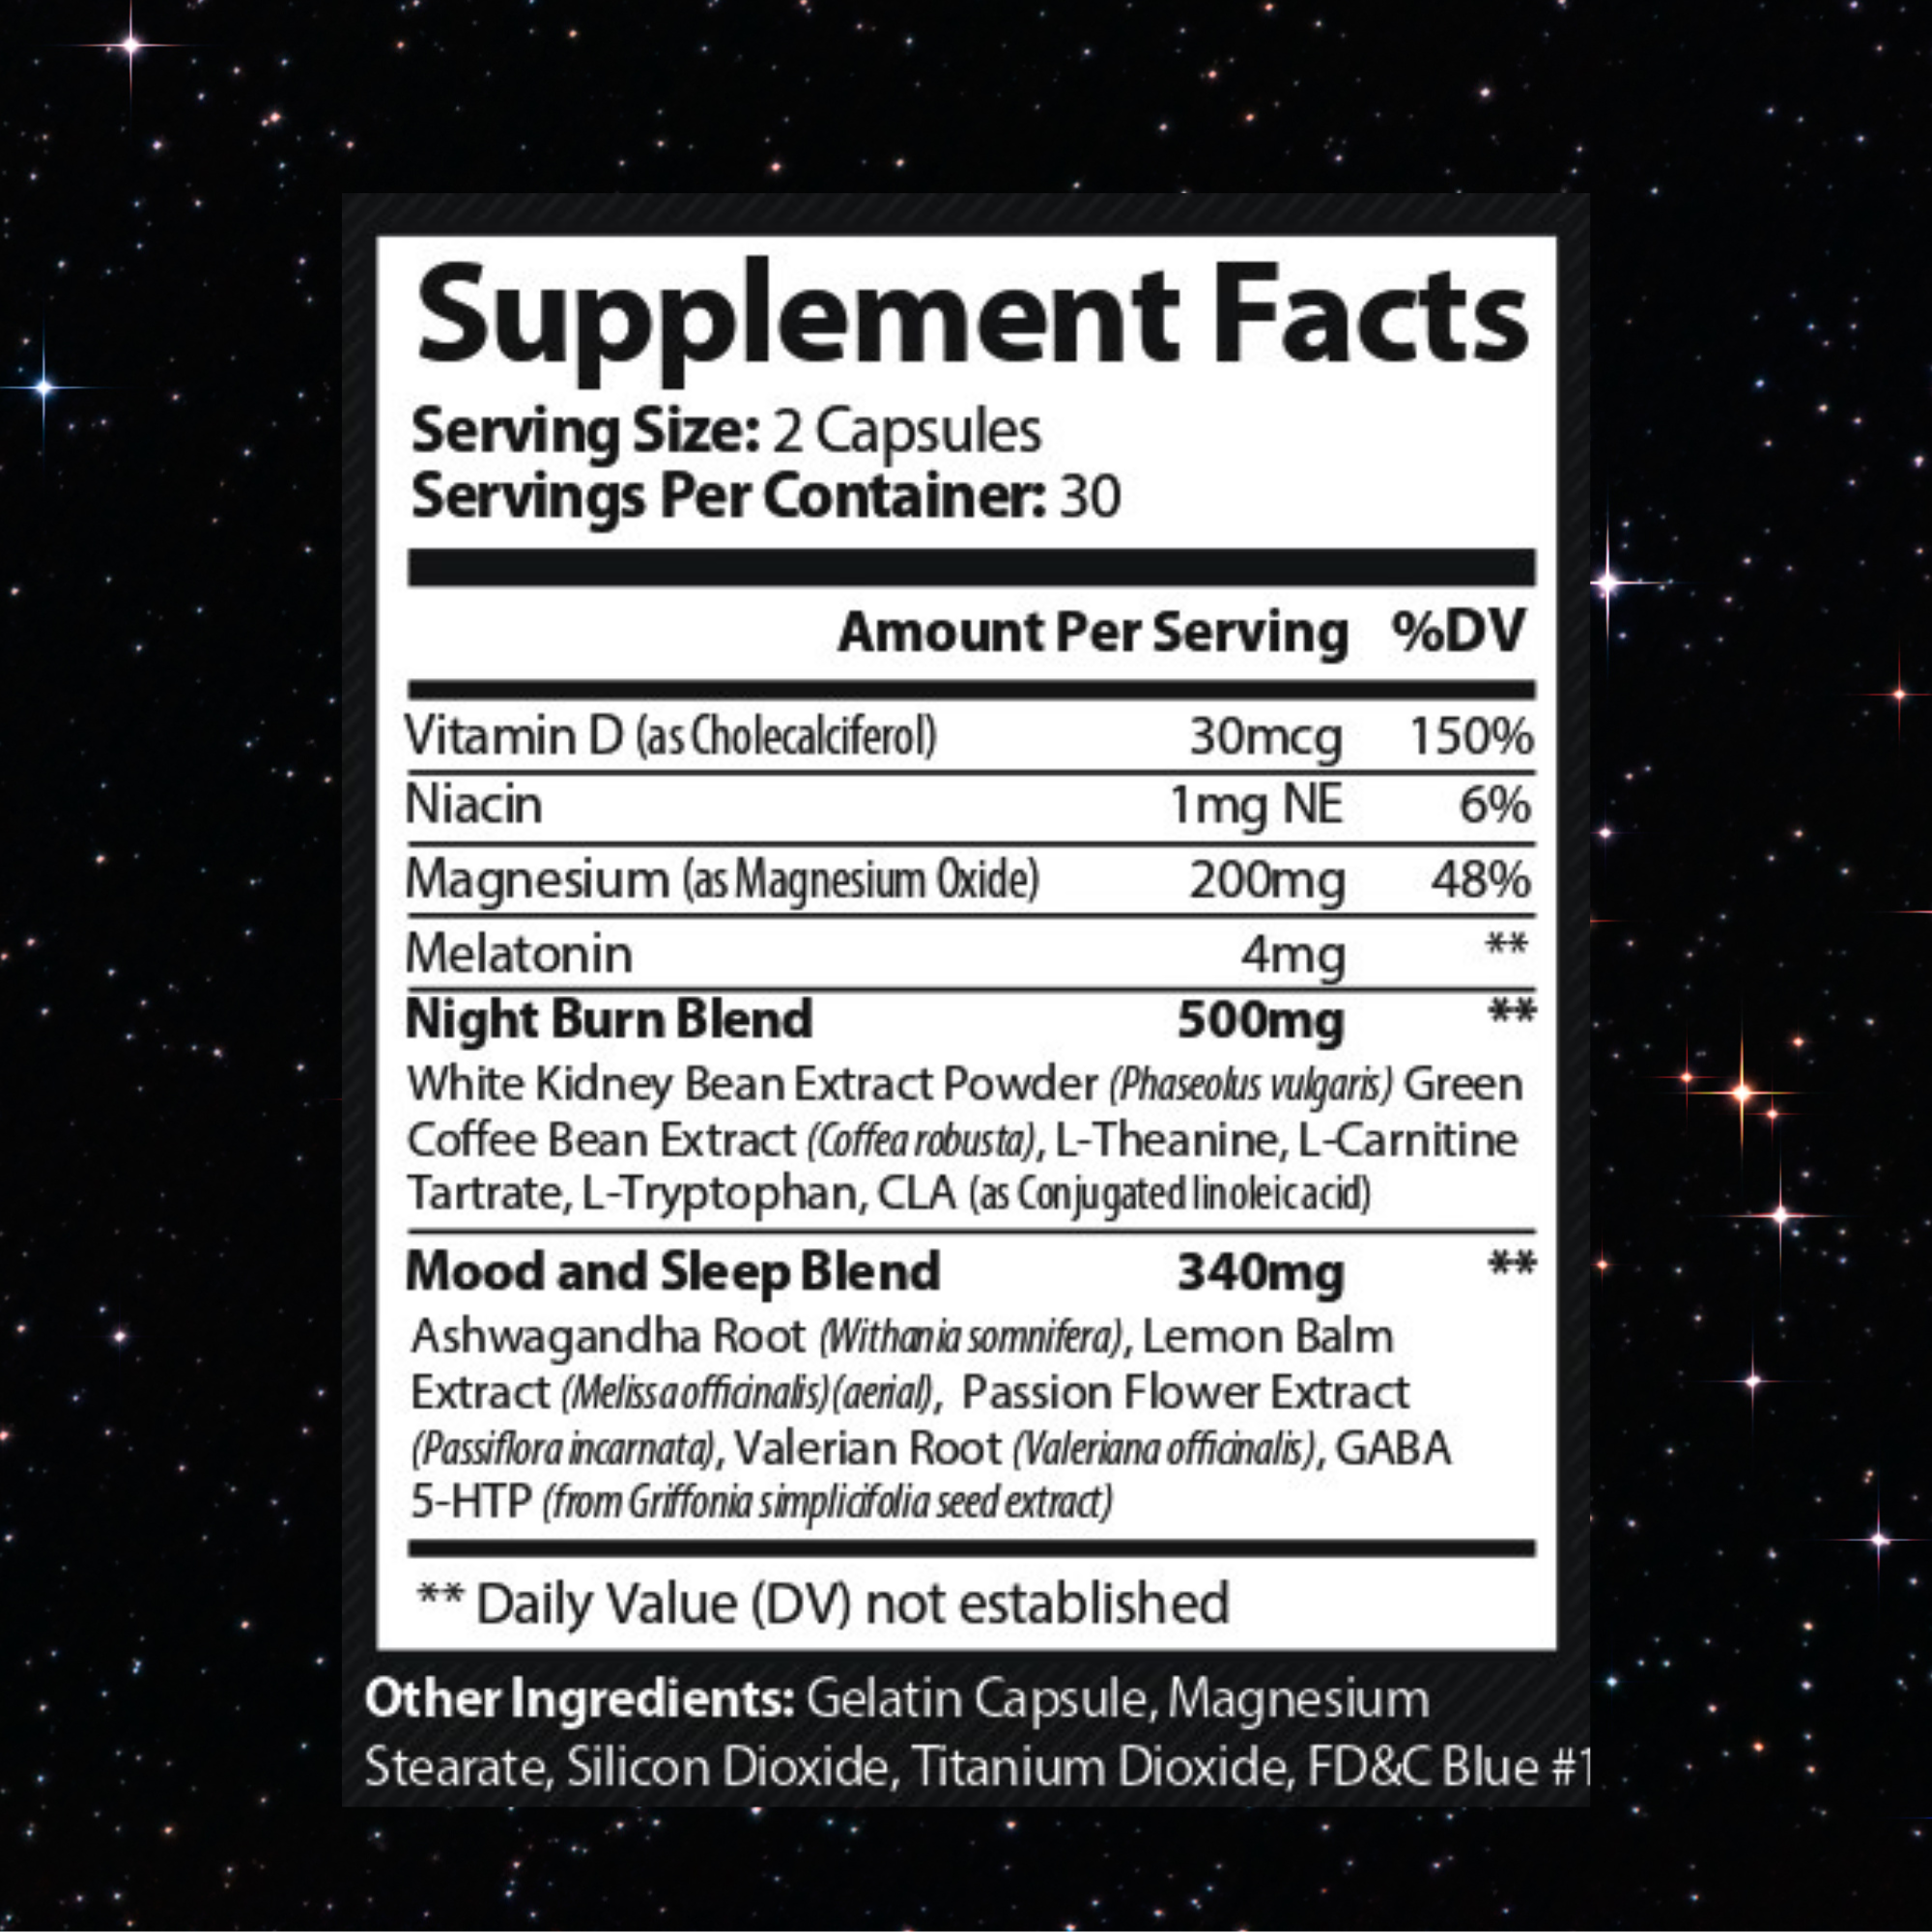 Supplement facts - sleeping tablets with melatonin fused with weight loss ingredients